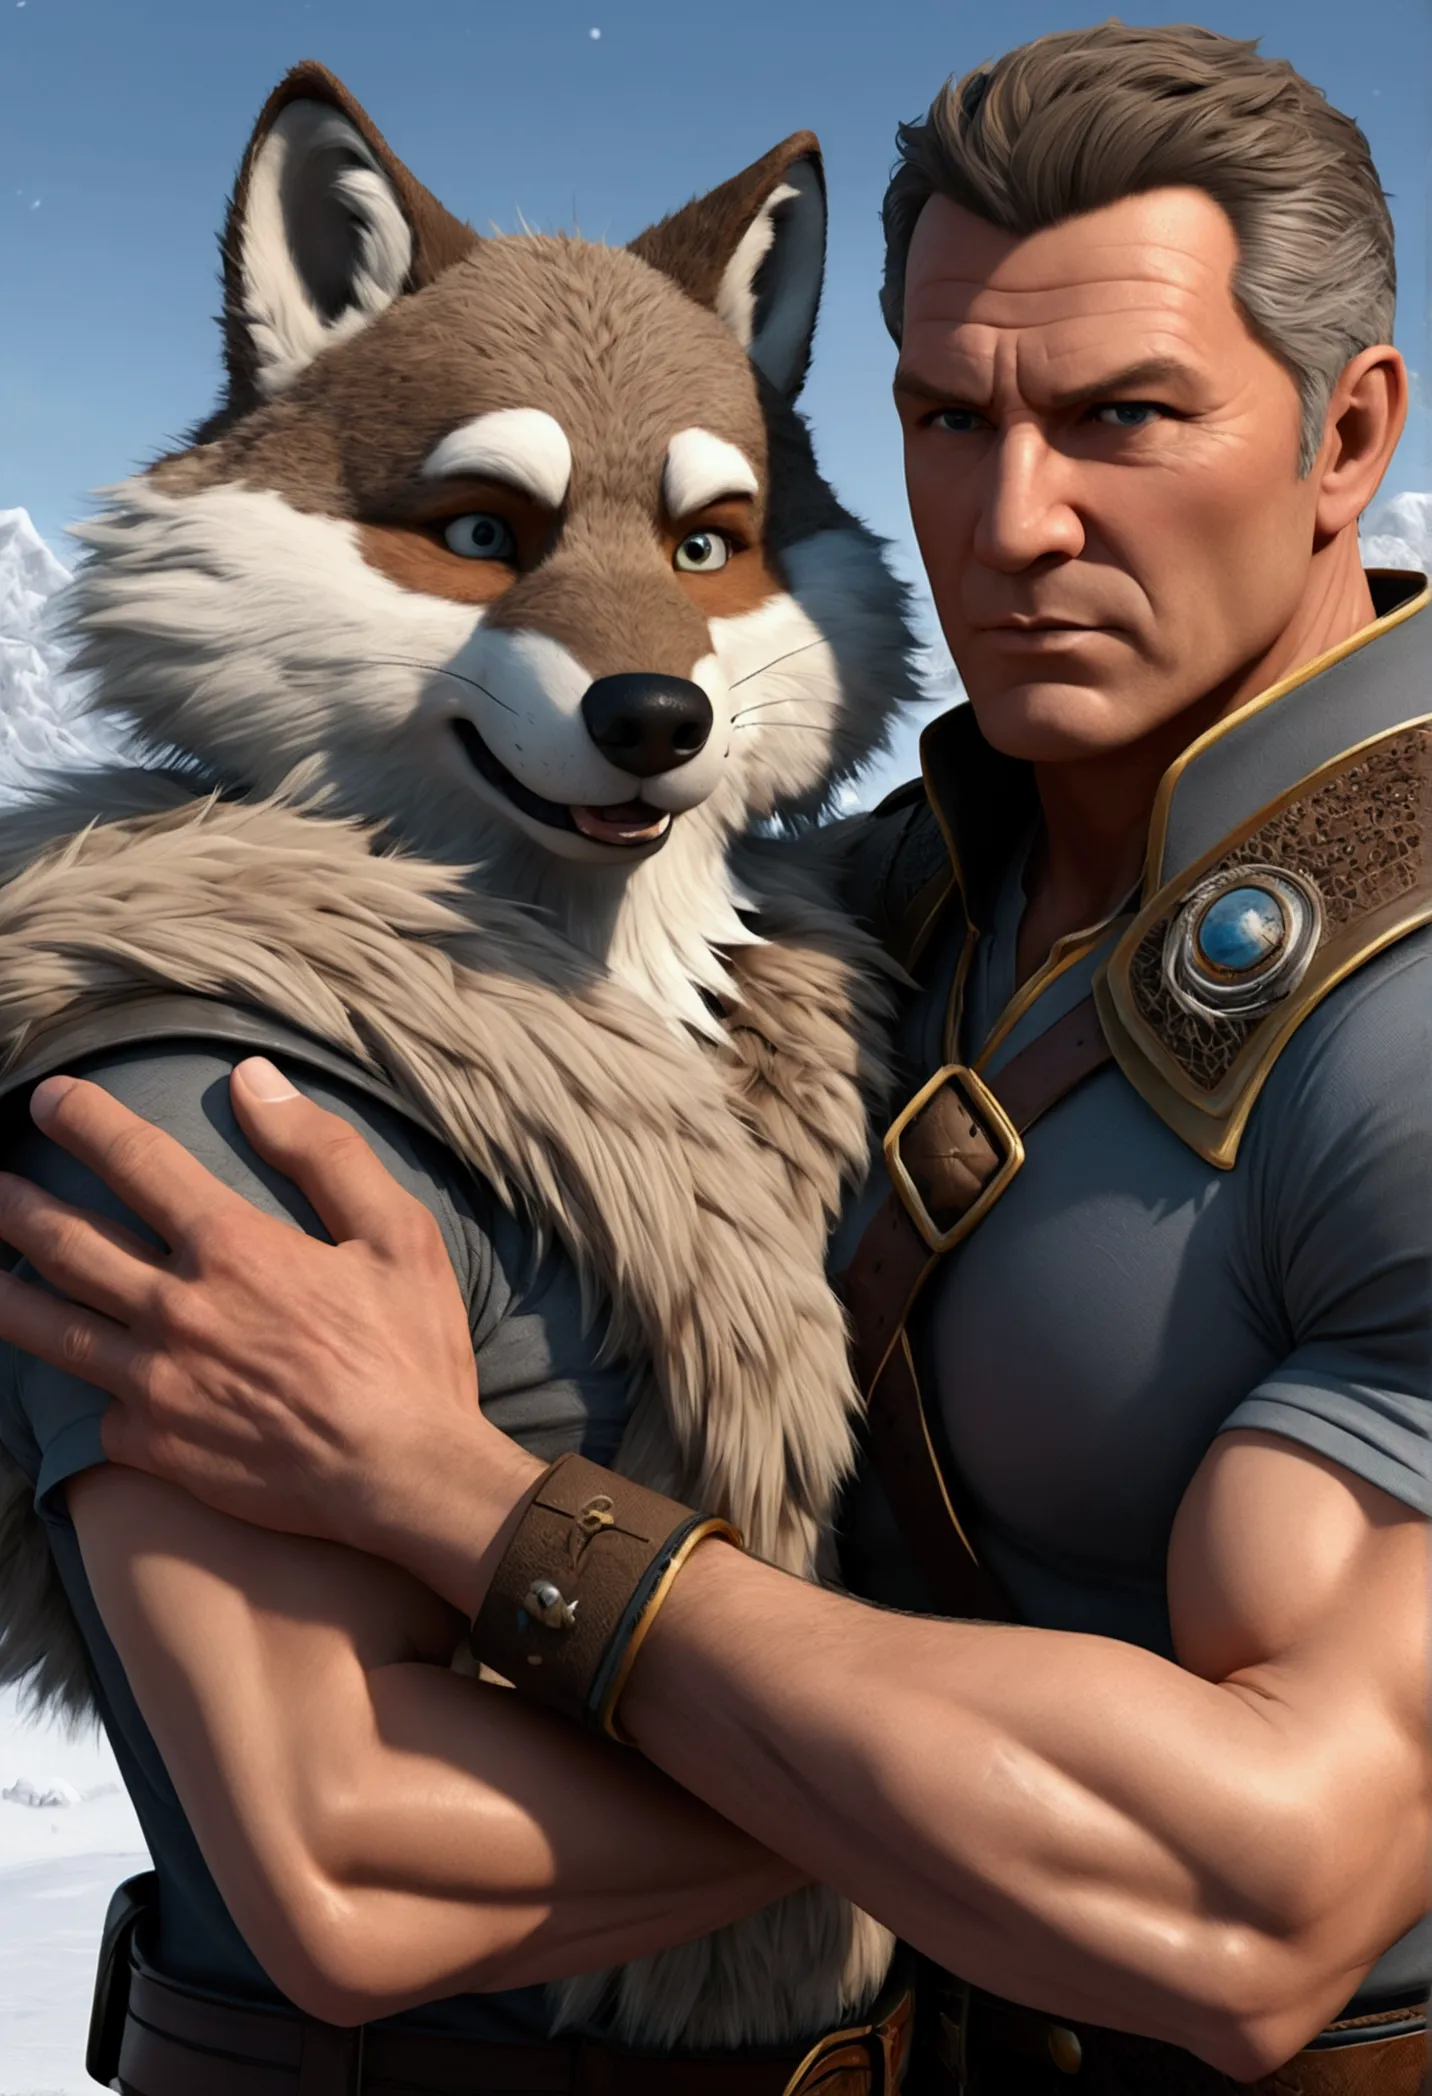 (photorealistic:1.4), 8k, (masterpiece), Best Quality, of the highest quality, (highly detailed fur:1.5), (detailed muscles:1.4), (detailed face:1.5), (realistic eyes), original, High resolution, unparalleled masterpiece, ultra realistic 8k, perfect work o...